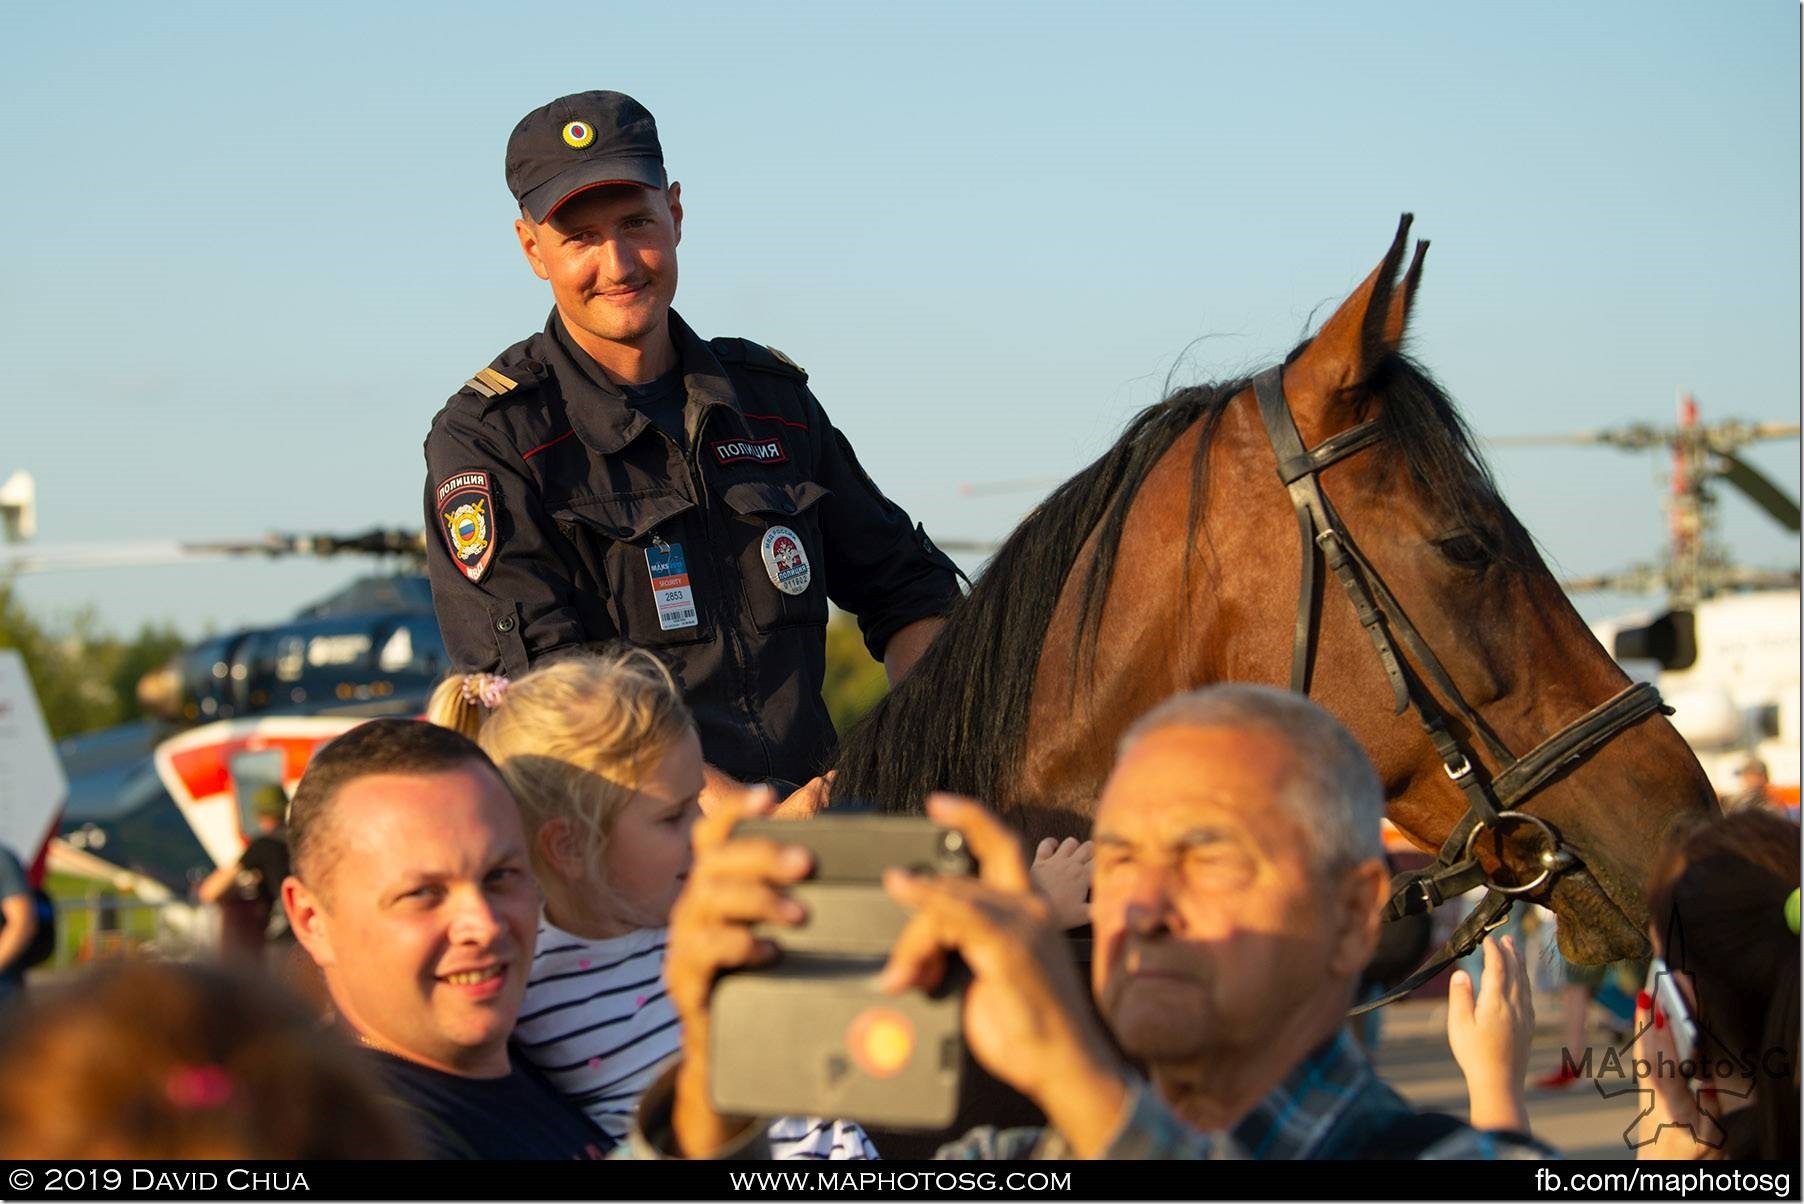 One of the many security officers on horseback mingling with the crowd